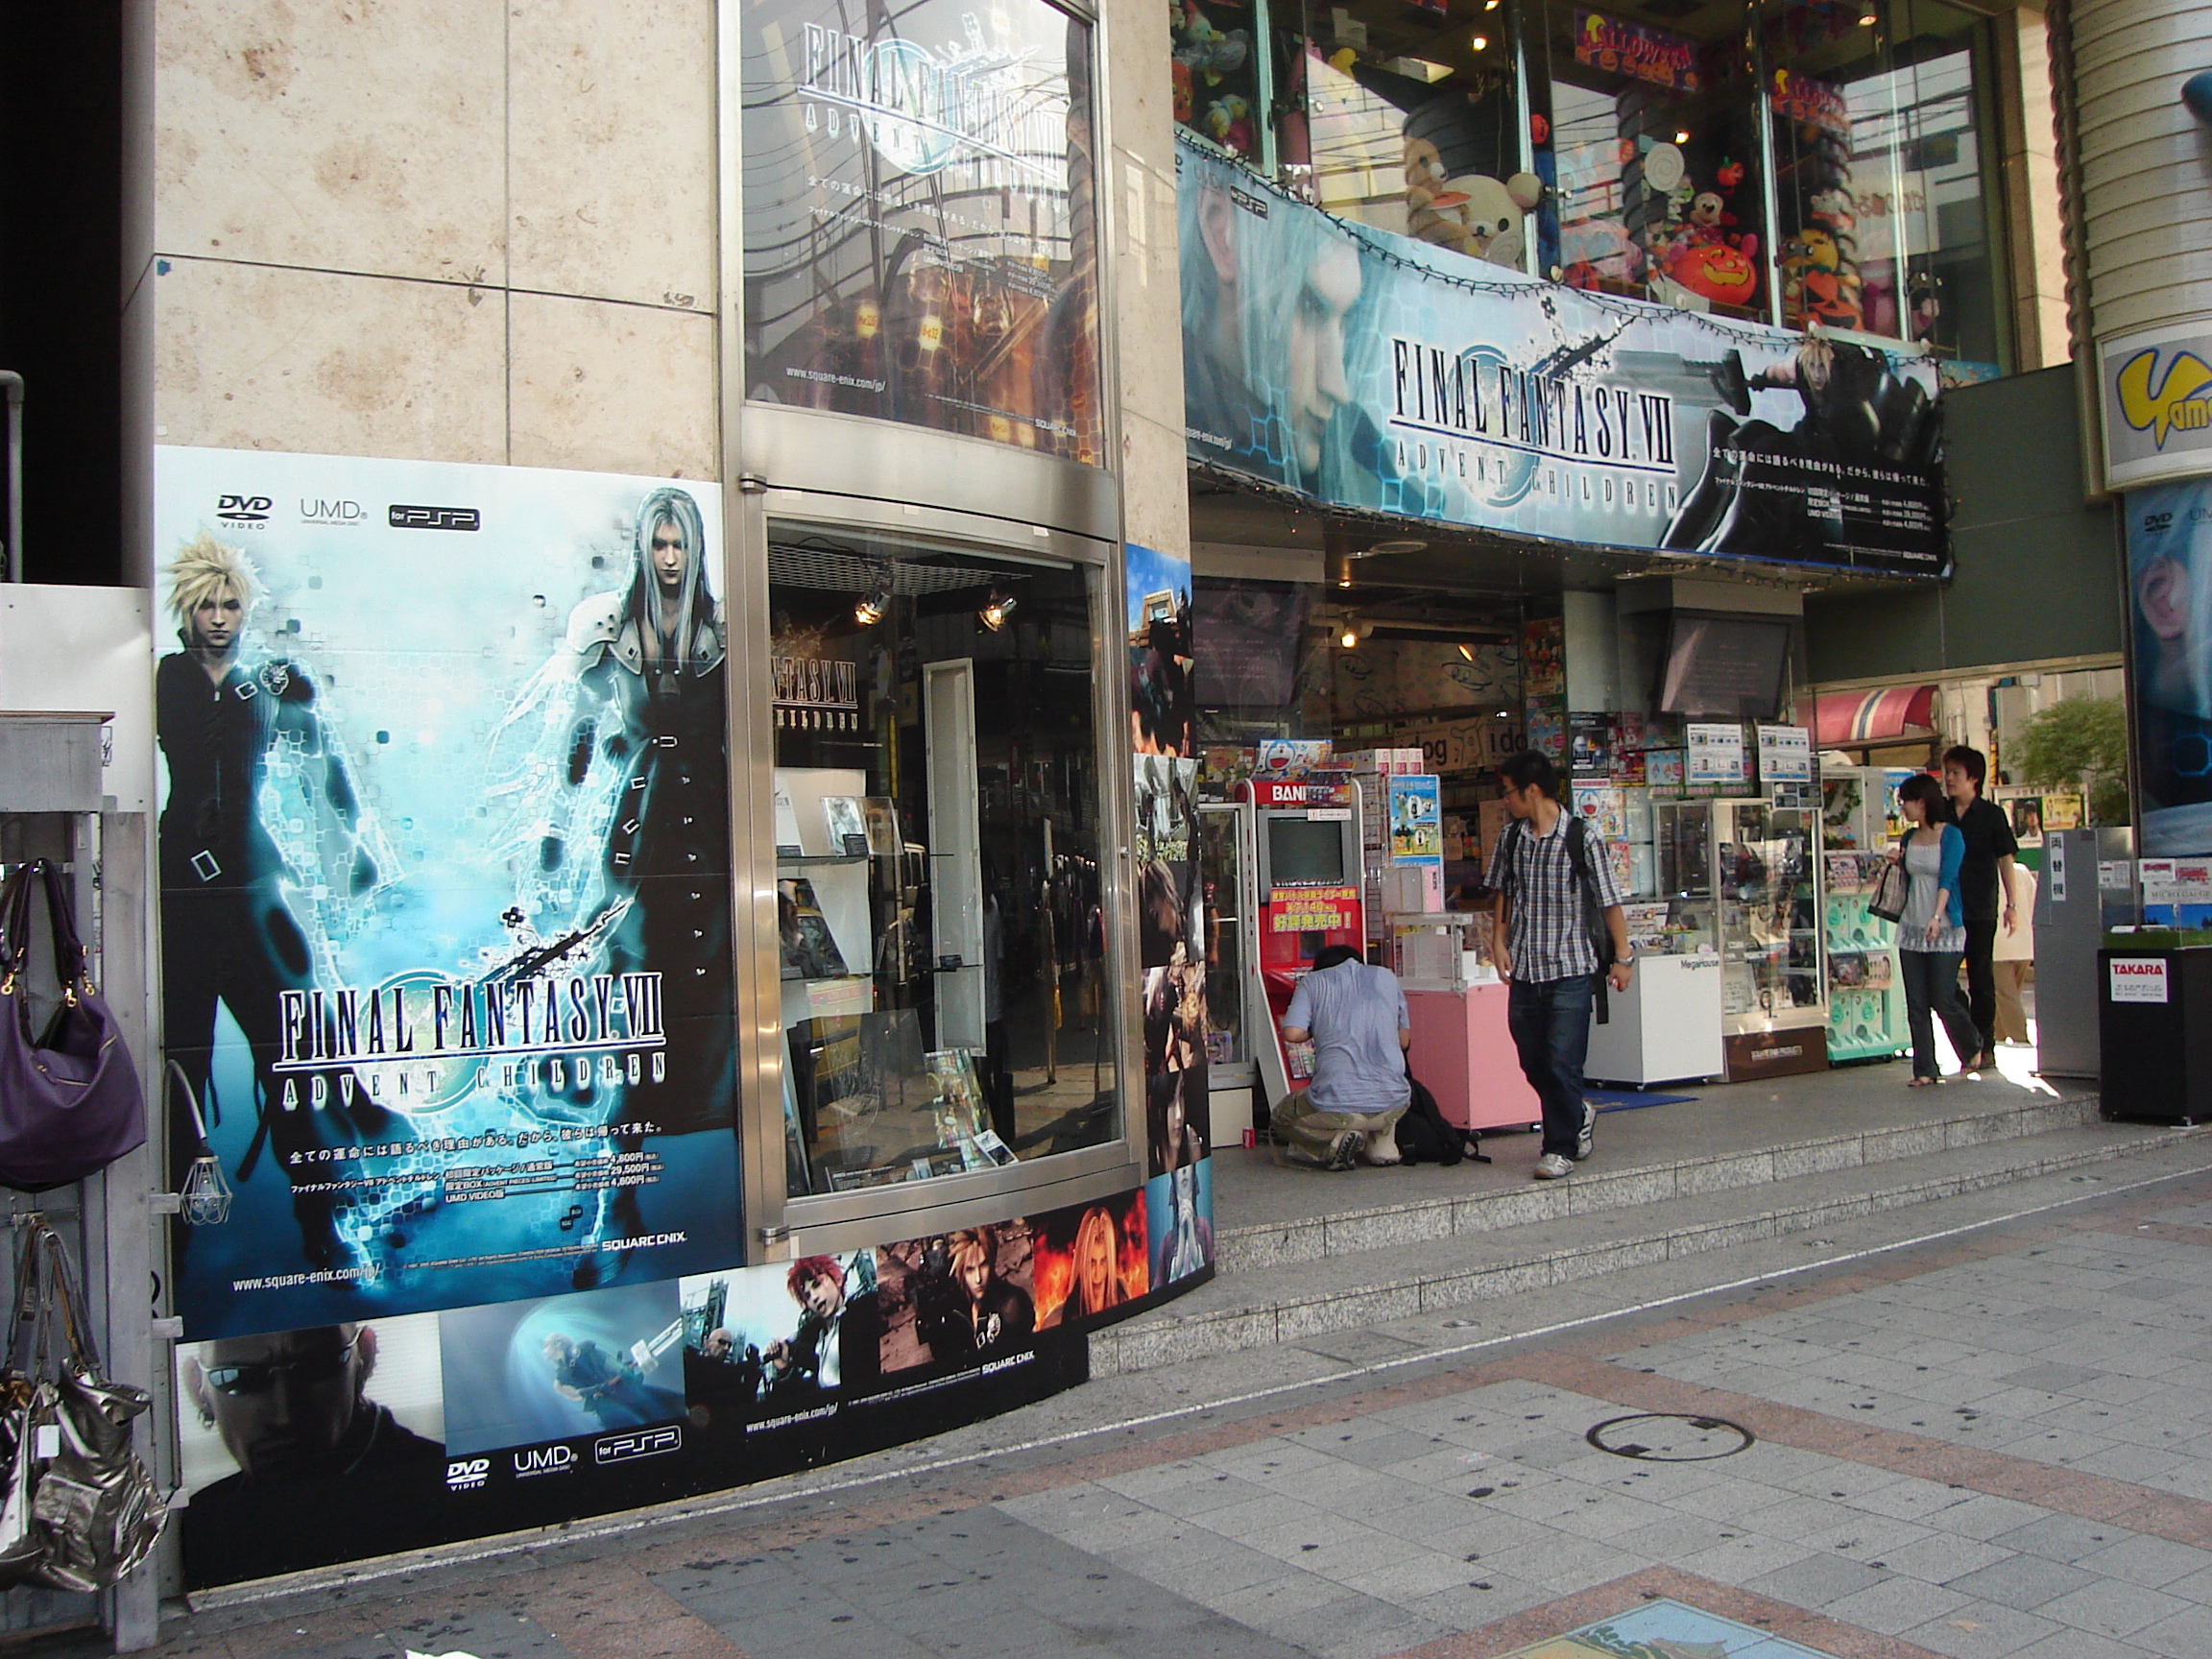 posters decorate the outside of a store